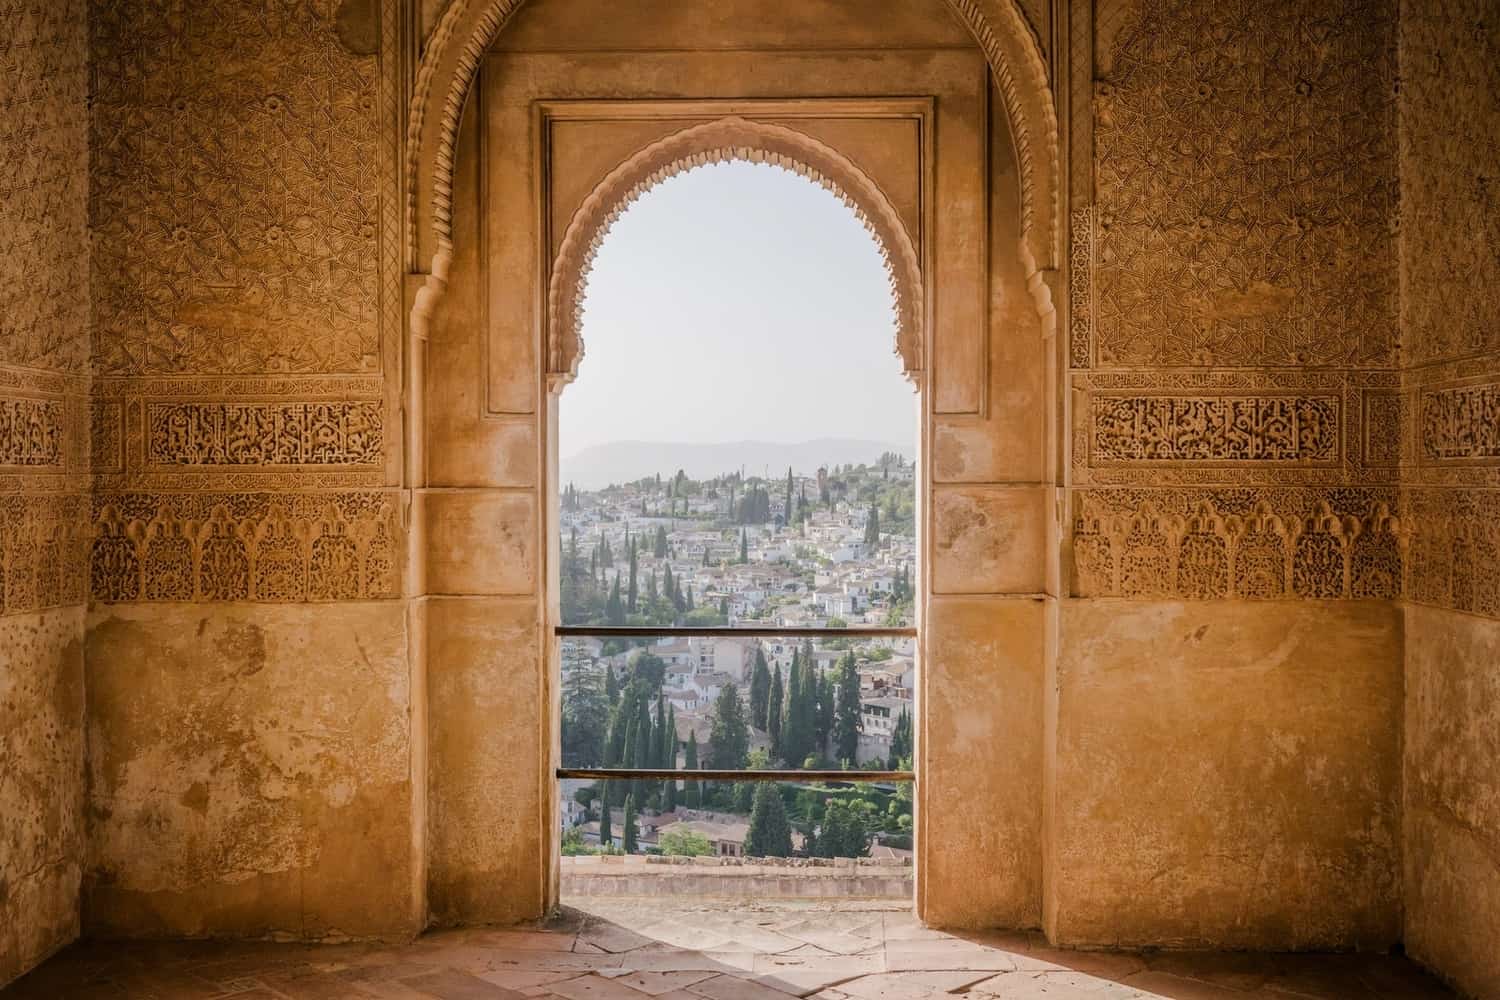 Archway looking out to a landscape from the Alhambra in Granada. unique places to visit in Spain